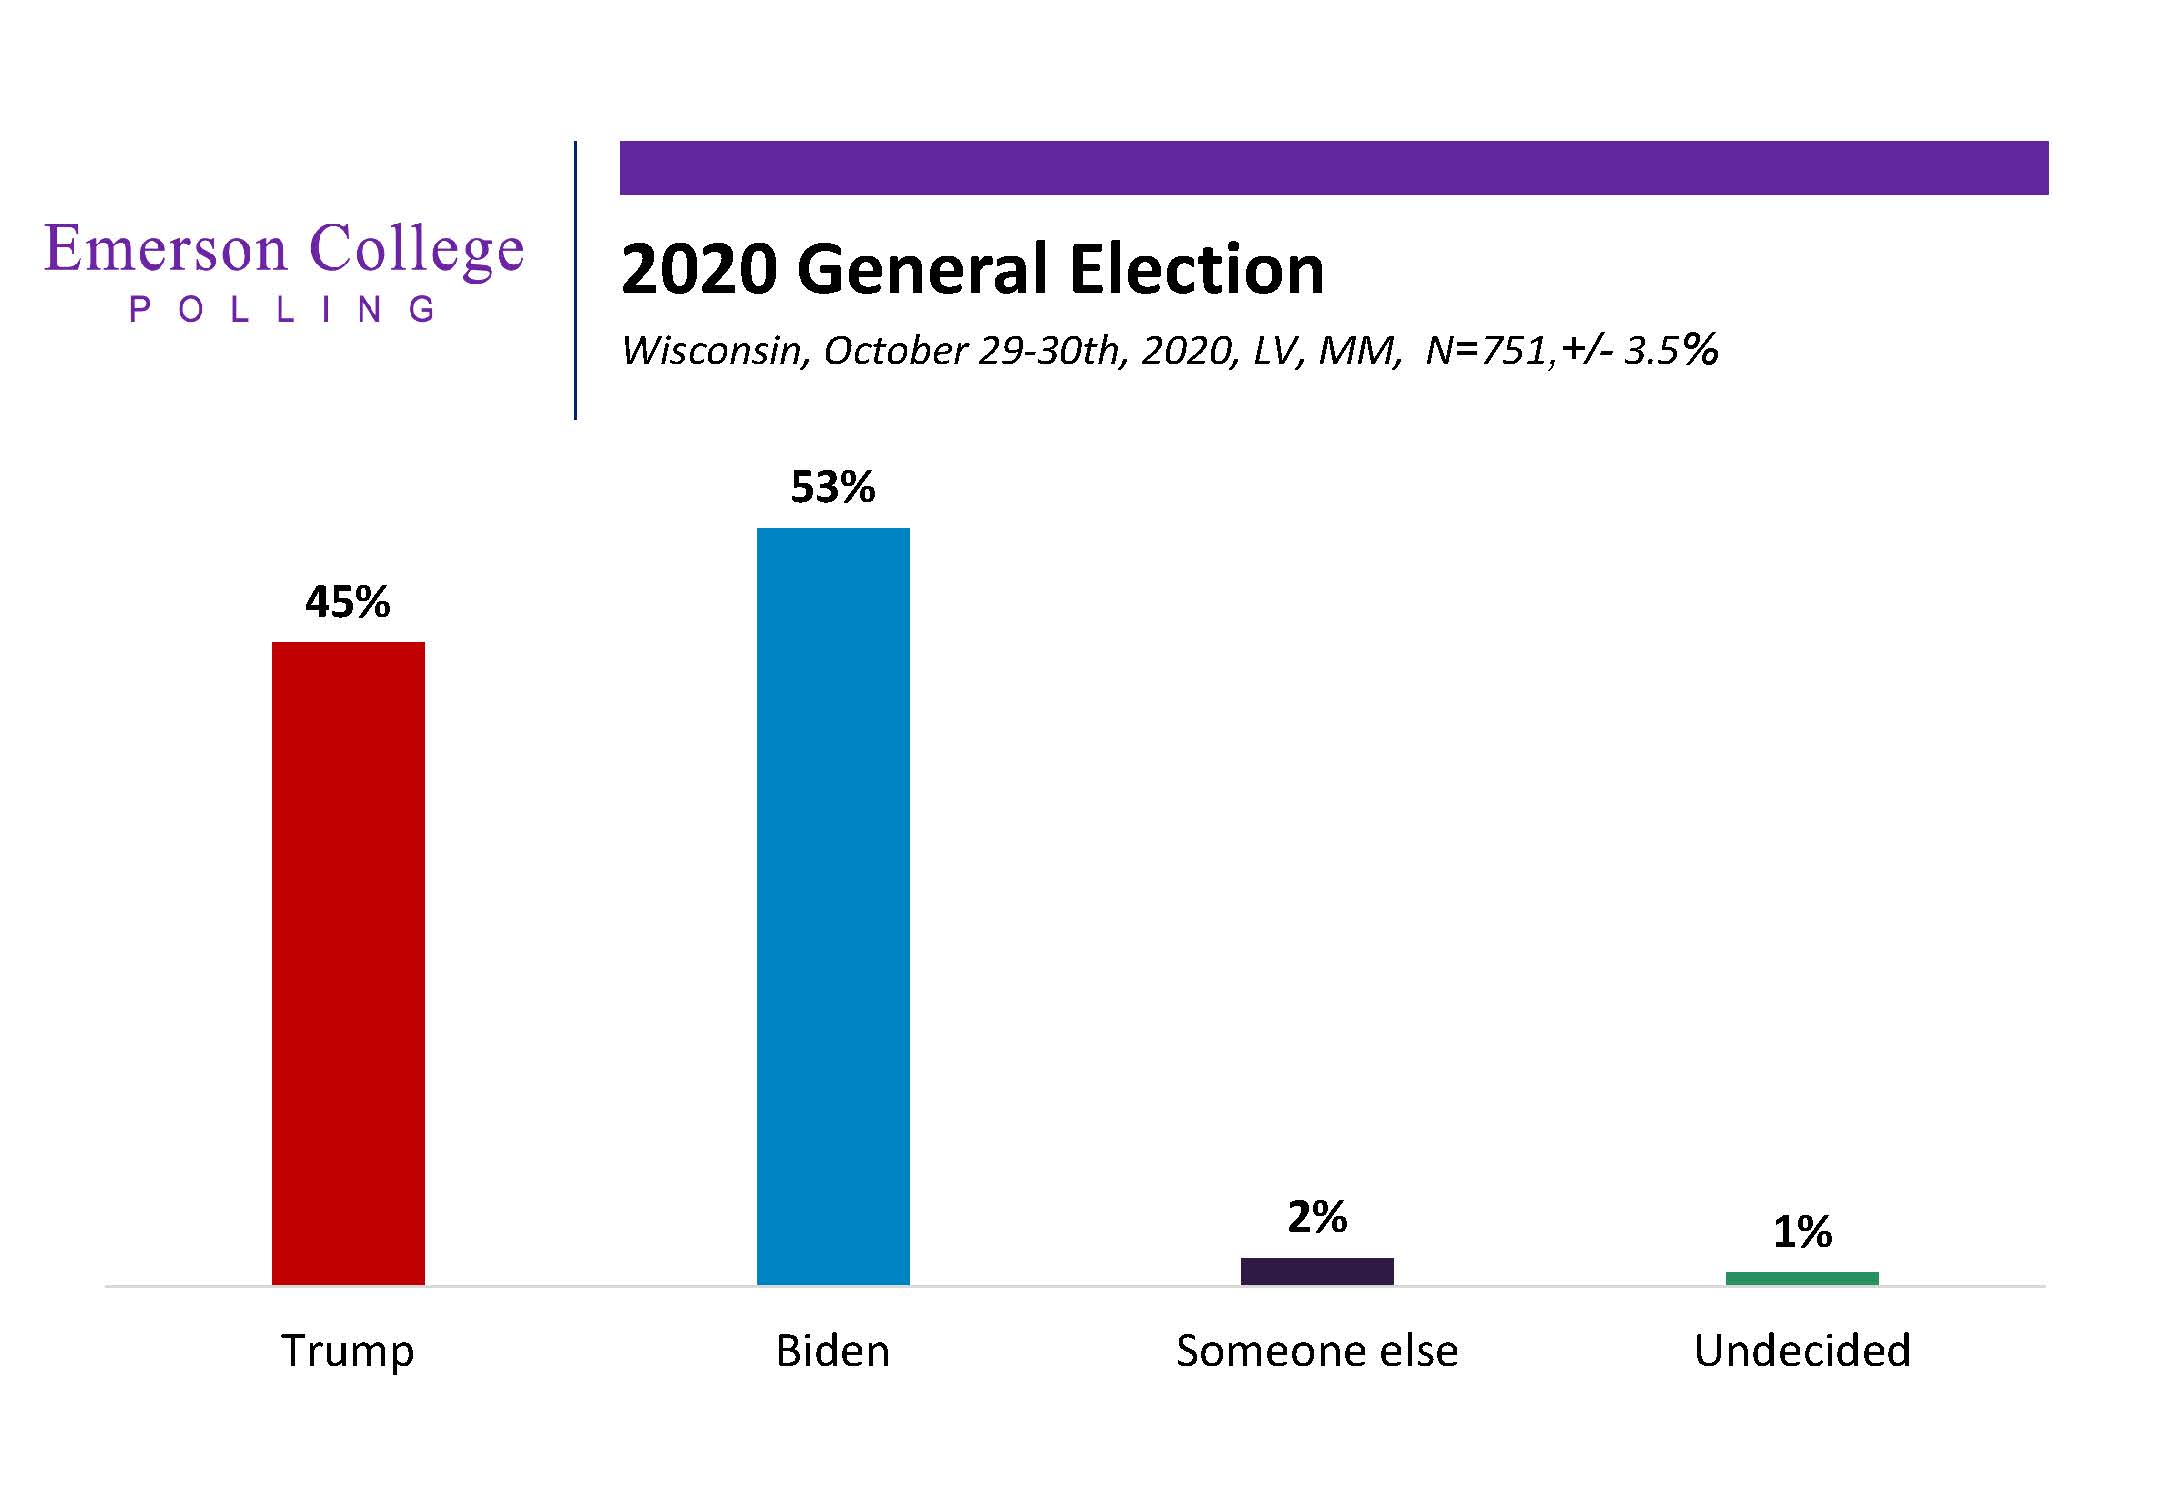 Super Poll Sunday Pregame: Polls Show Midwest Shift for Biden in Wisconsin, Nebraska’s 2nd District, and Vigo County, Indiana